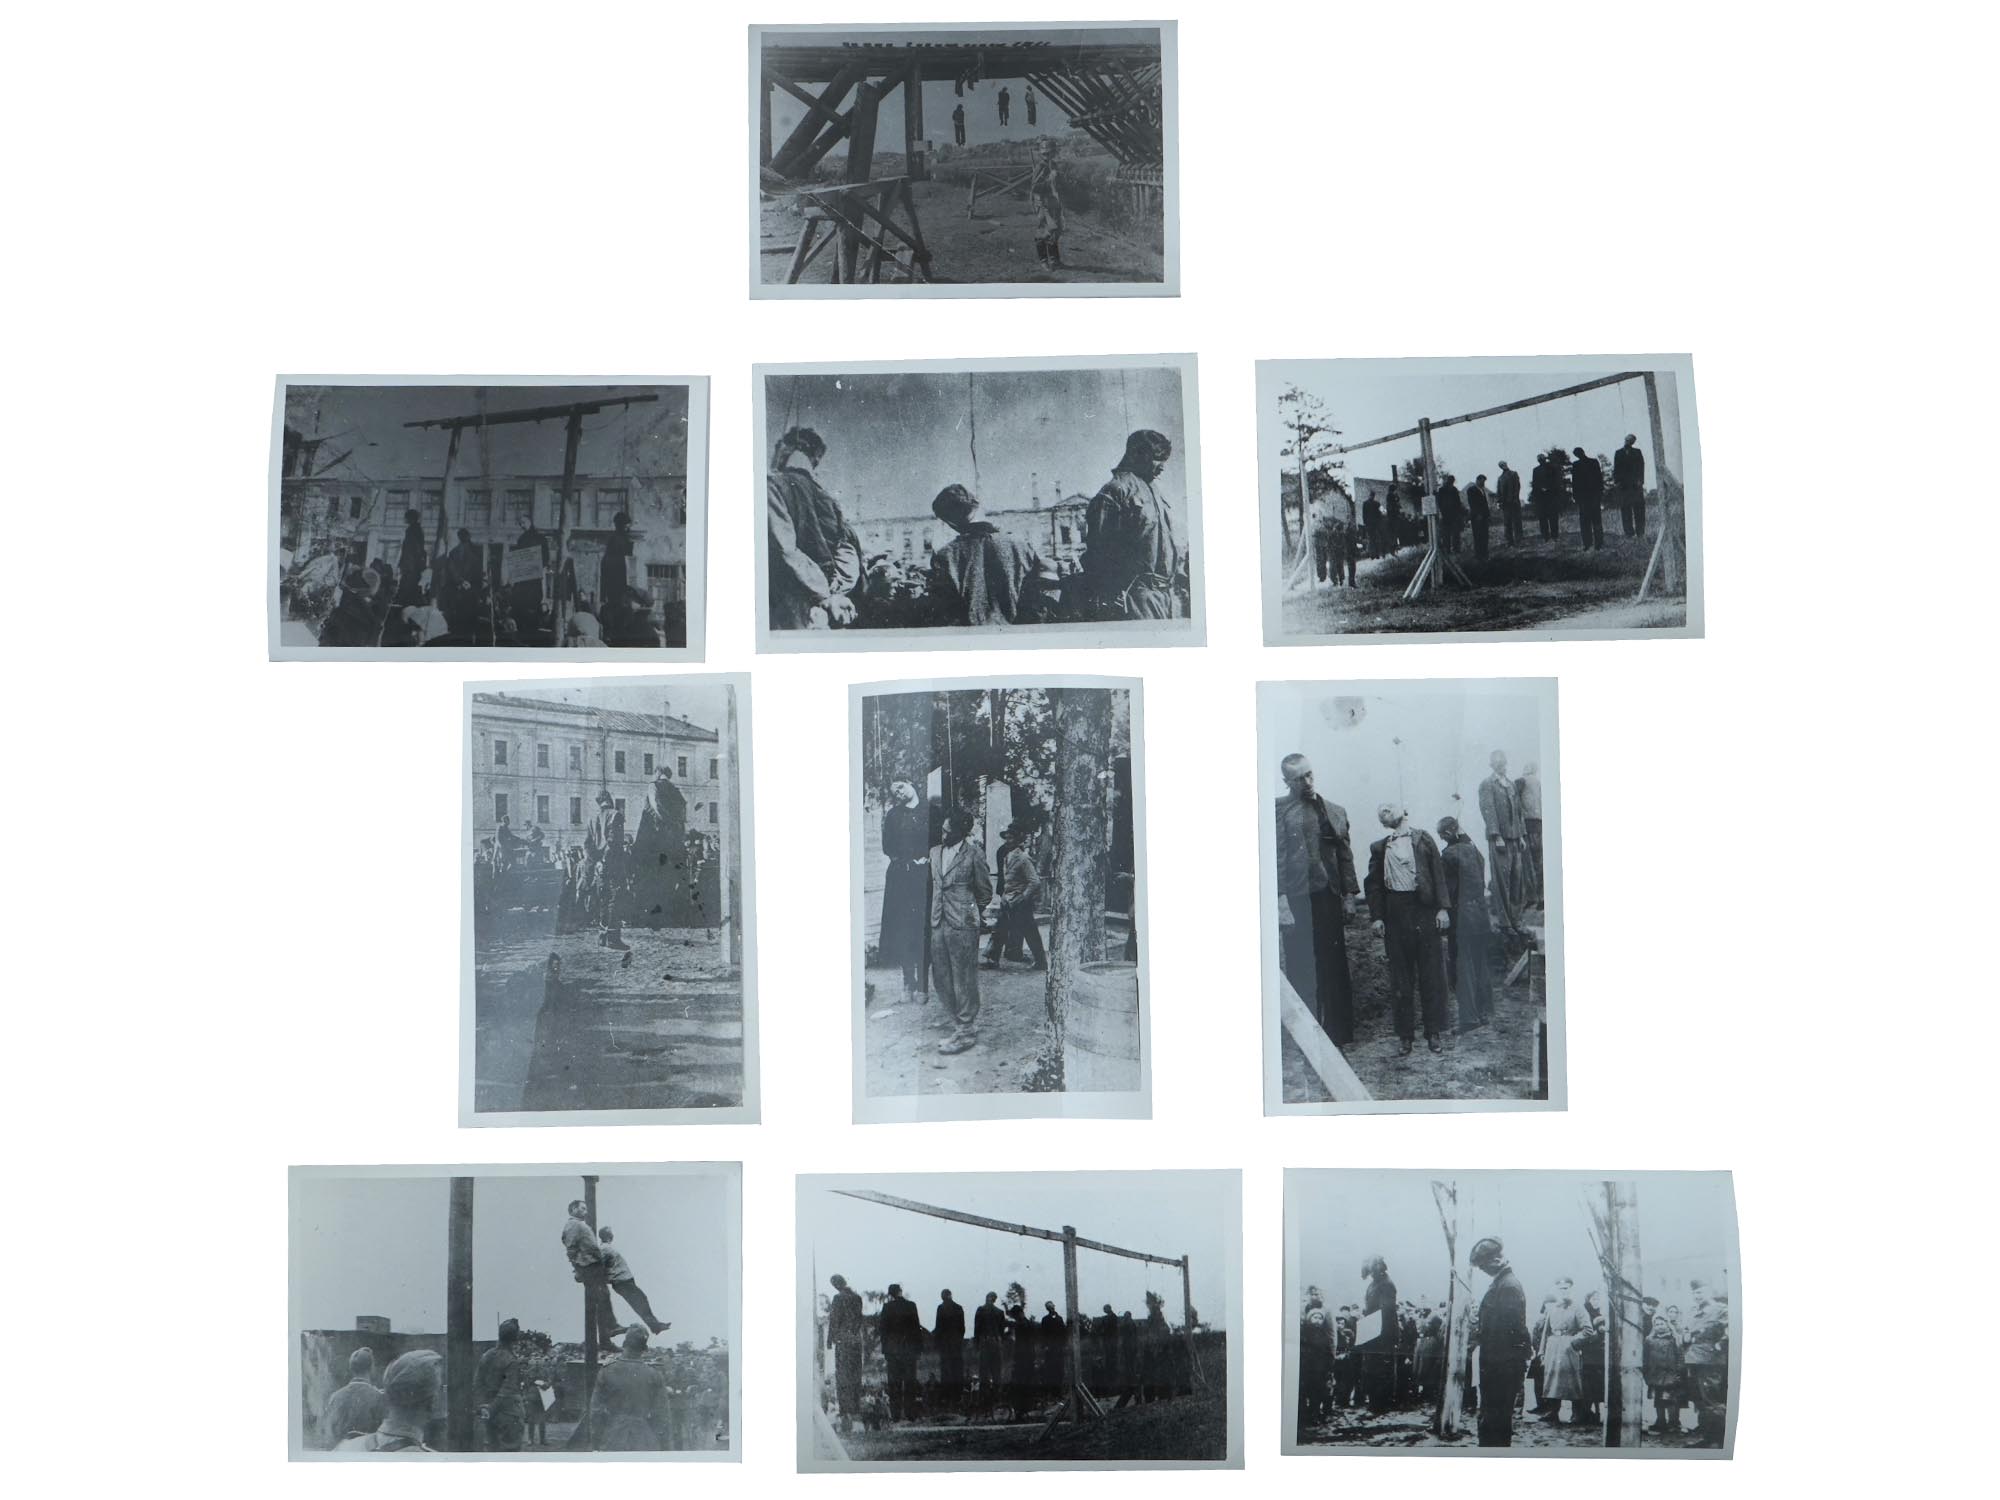 GROUP OF 10 PHOTOS OF NAZI ATROCITIES AGAINST CIVILIANS PIC-0